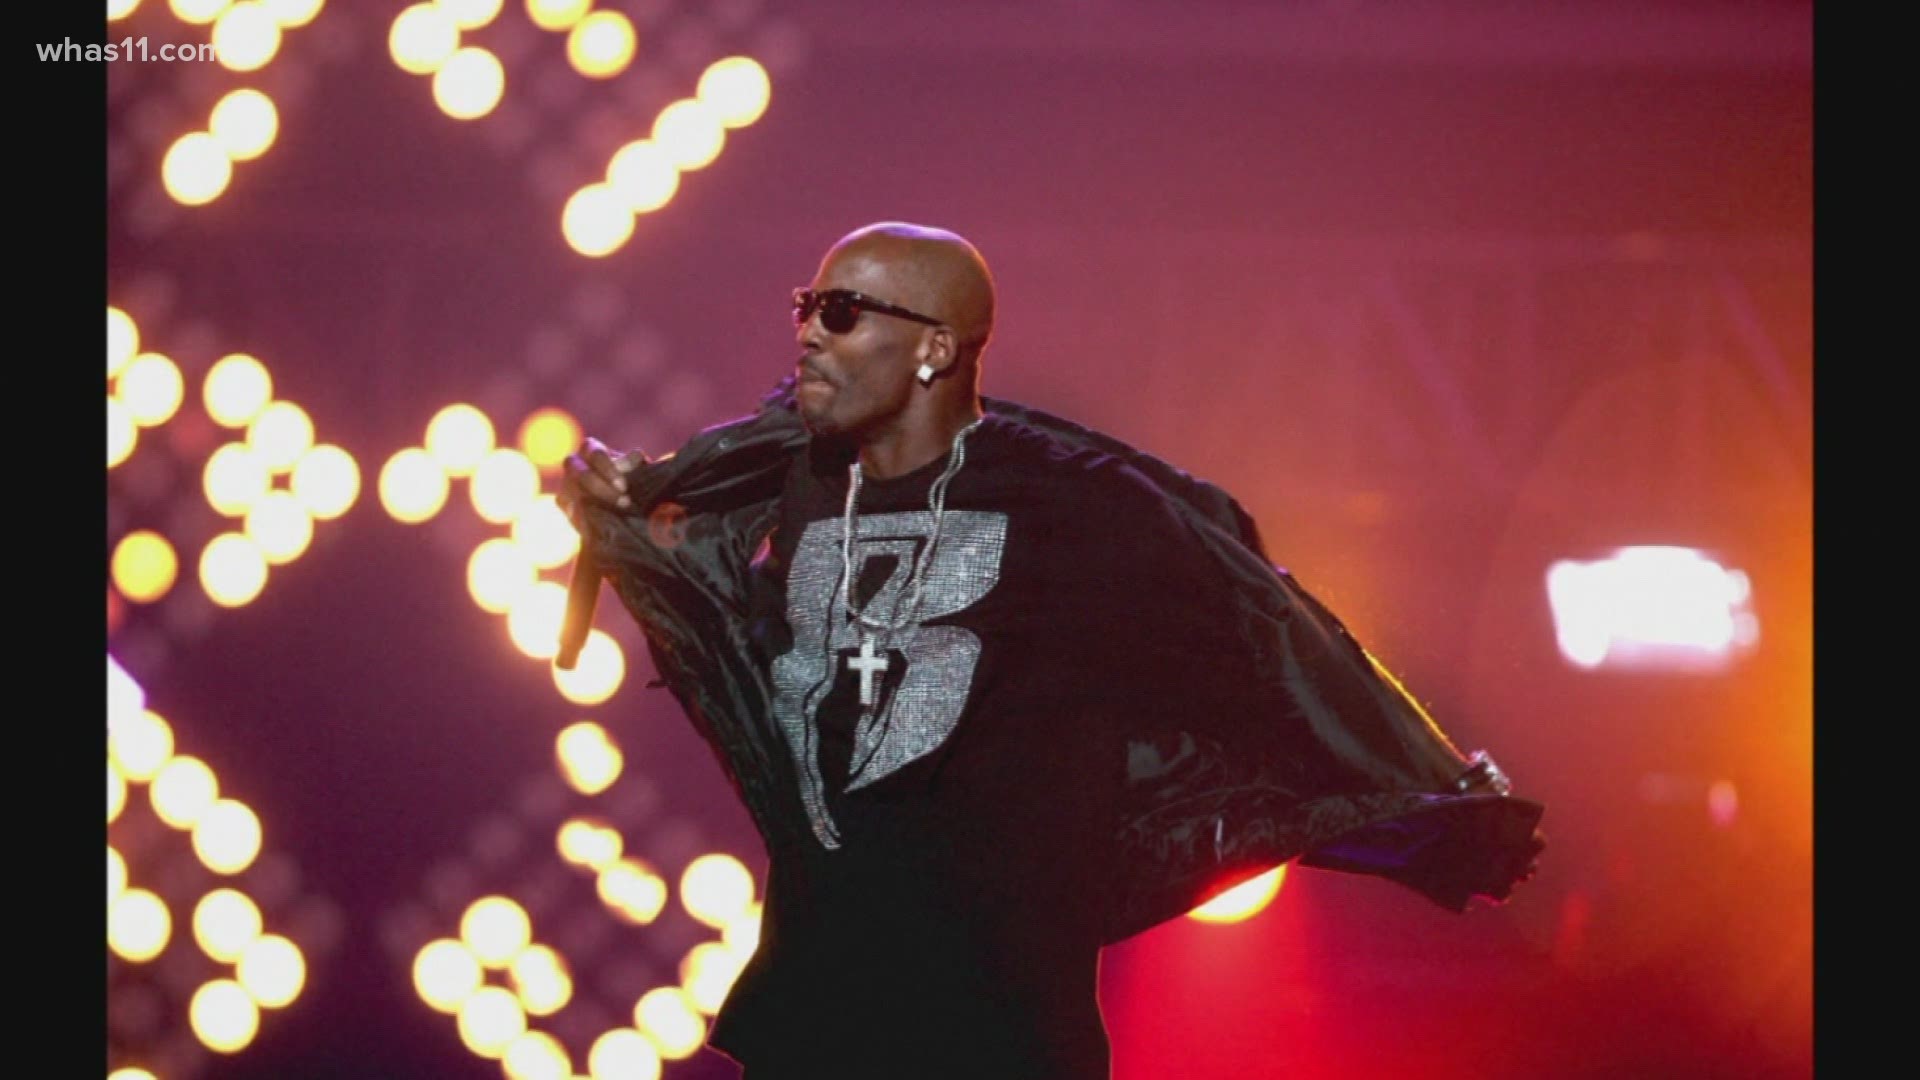 DMX made his mark as one of hip-hop’s most recognizable names for his rap artistry, gruff delivery and as an actor.